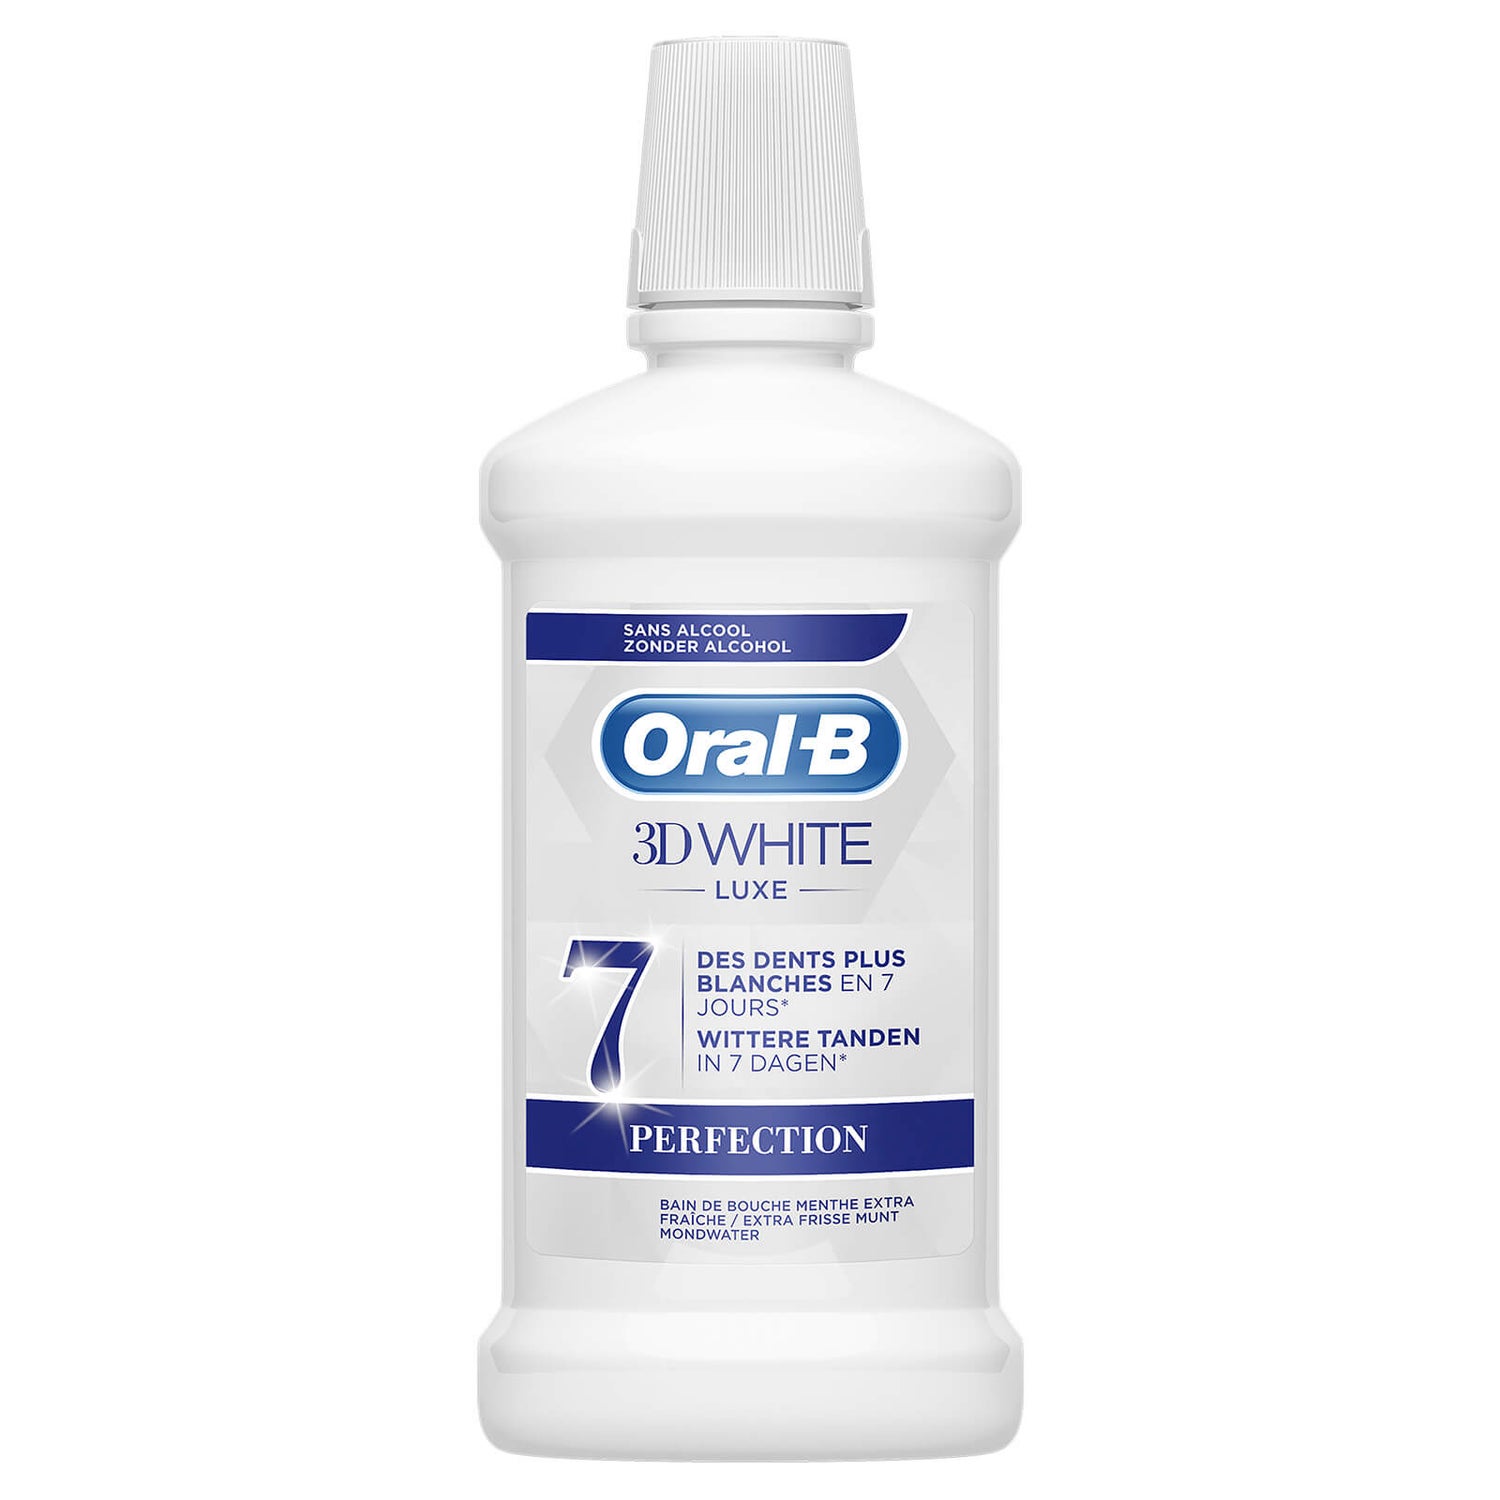 Oral-B 3D White Luxe Perfection Mondwater 500 ml